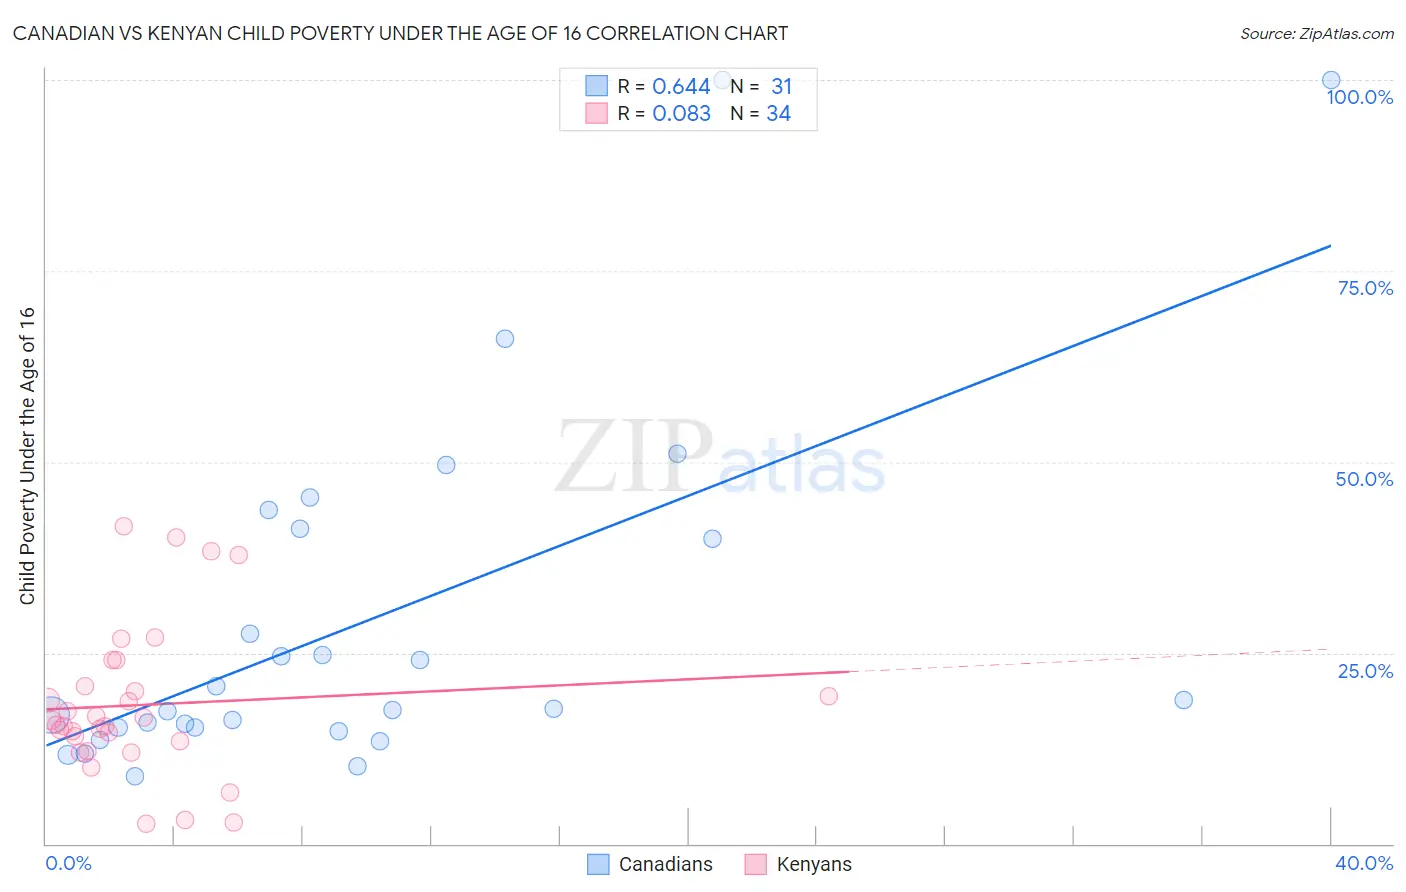 Canadian vs Kenyan Child Poverty Under the Age of 16